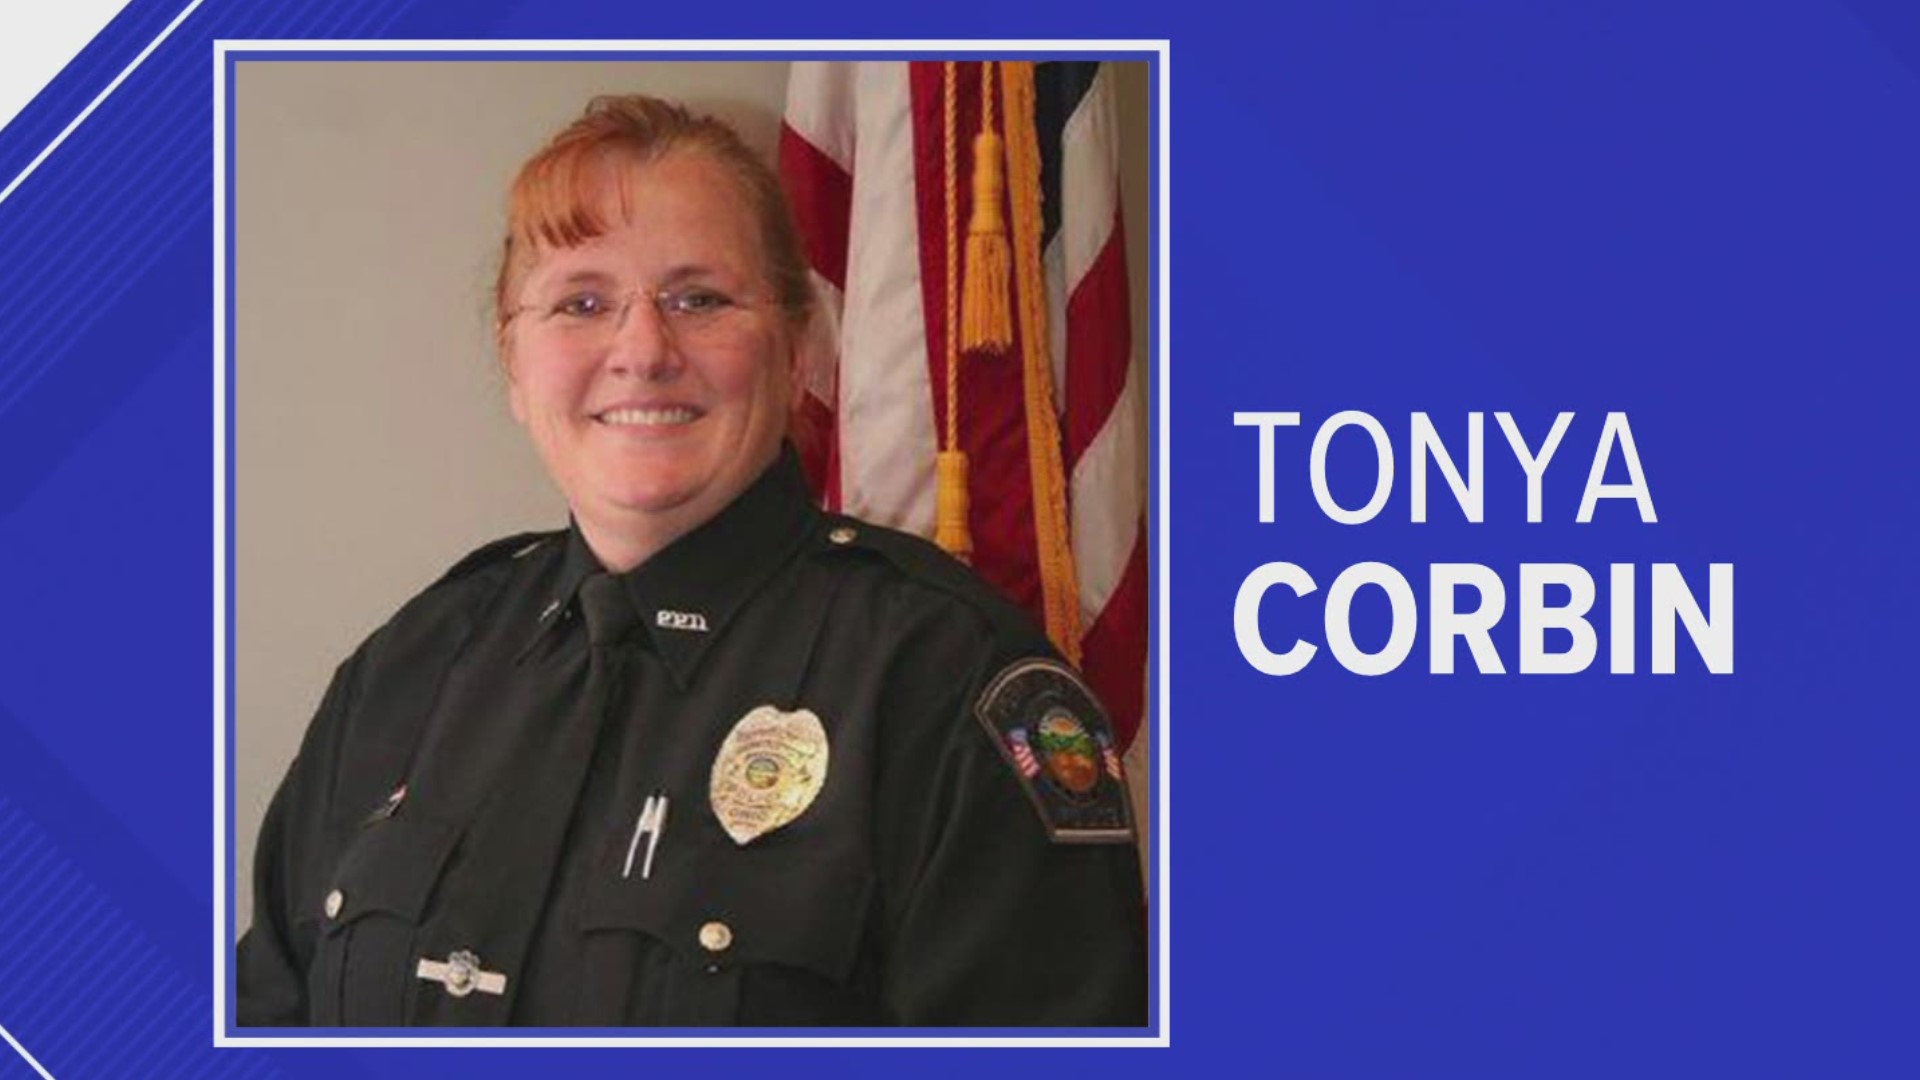 Perkins Twp. trustees voted unanimously to terminate Officer Tonya Corbin Monday.